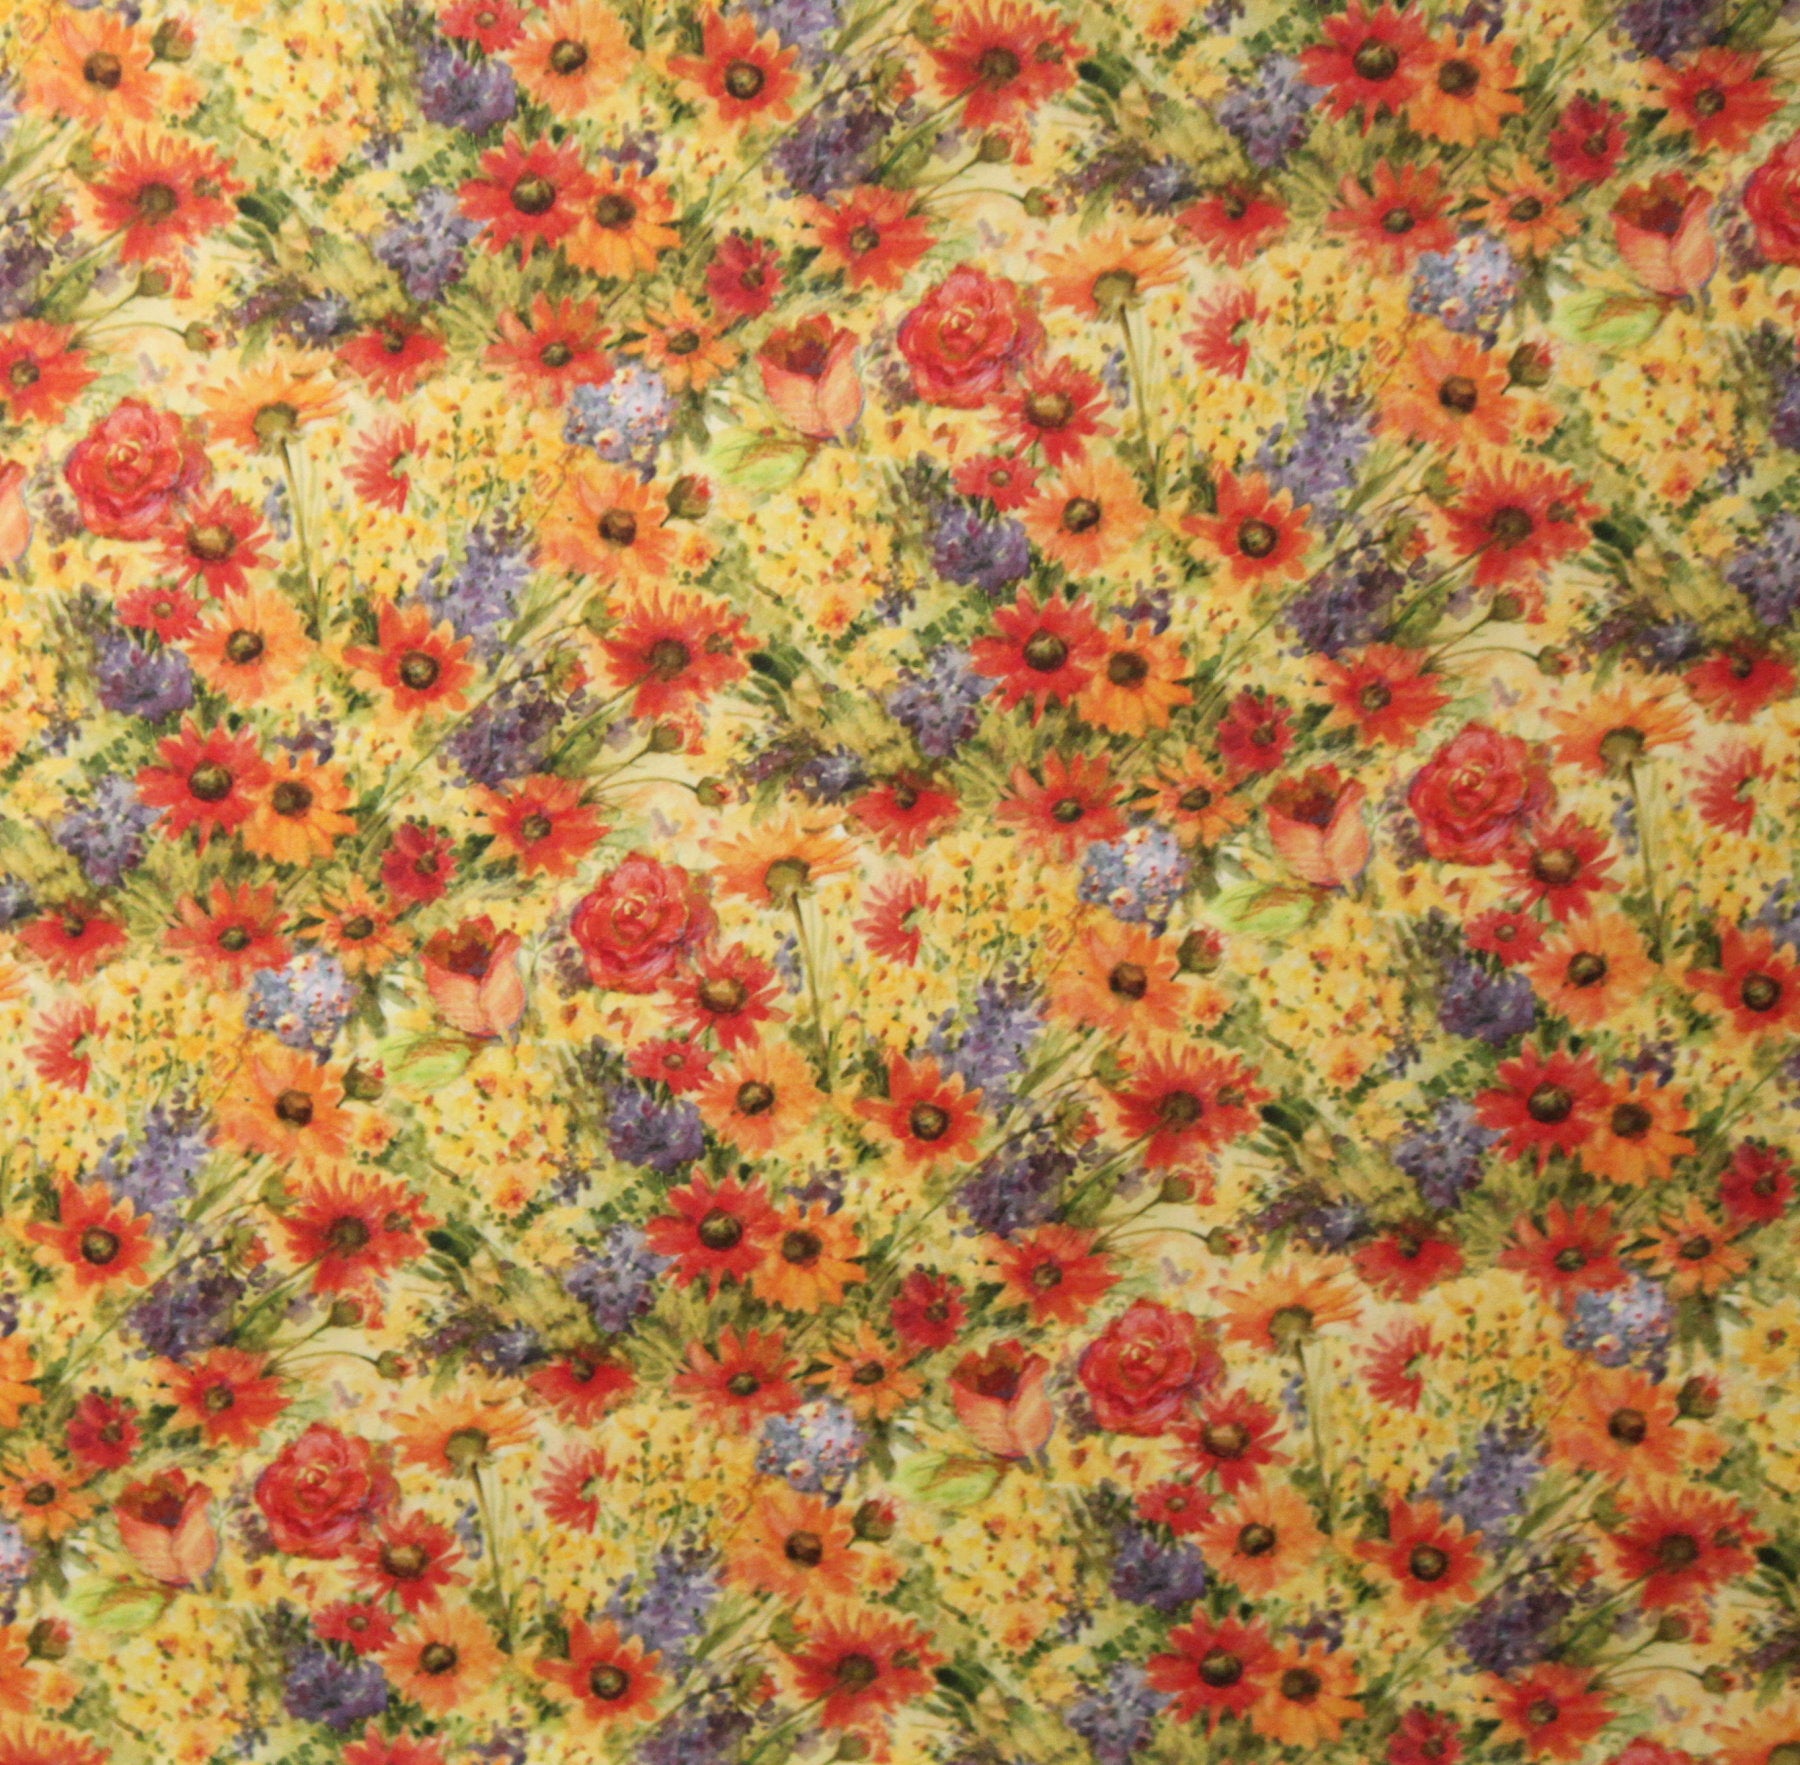 K & Company 12 x 12 Susan Winget Meadow Collection Double-Sided Light Cardstock Paper Colorful Wildflowers